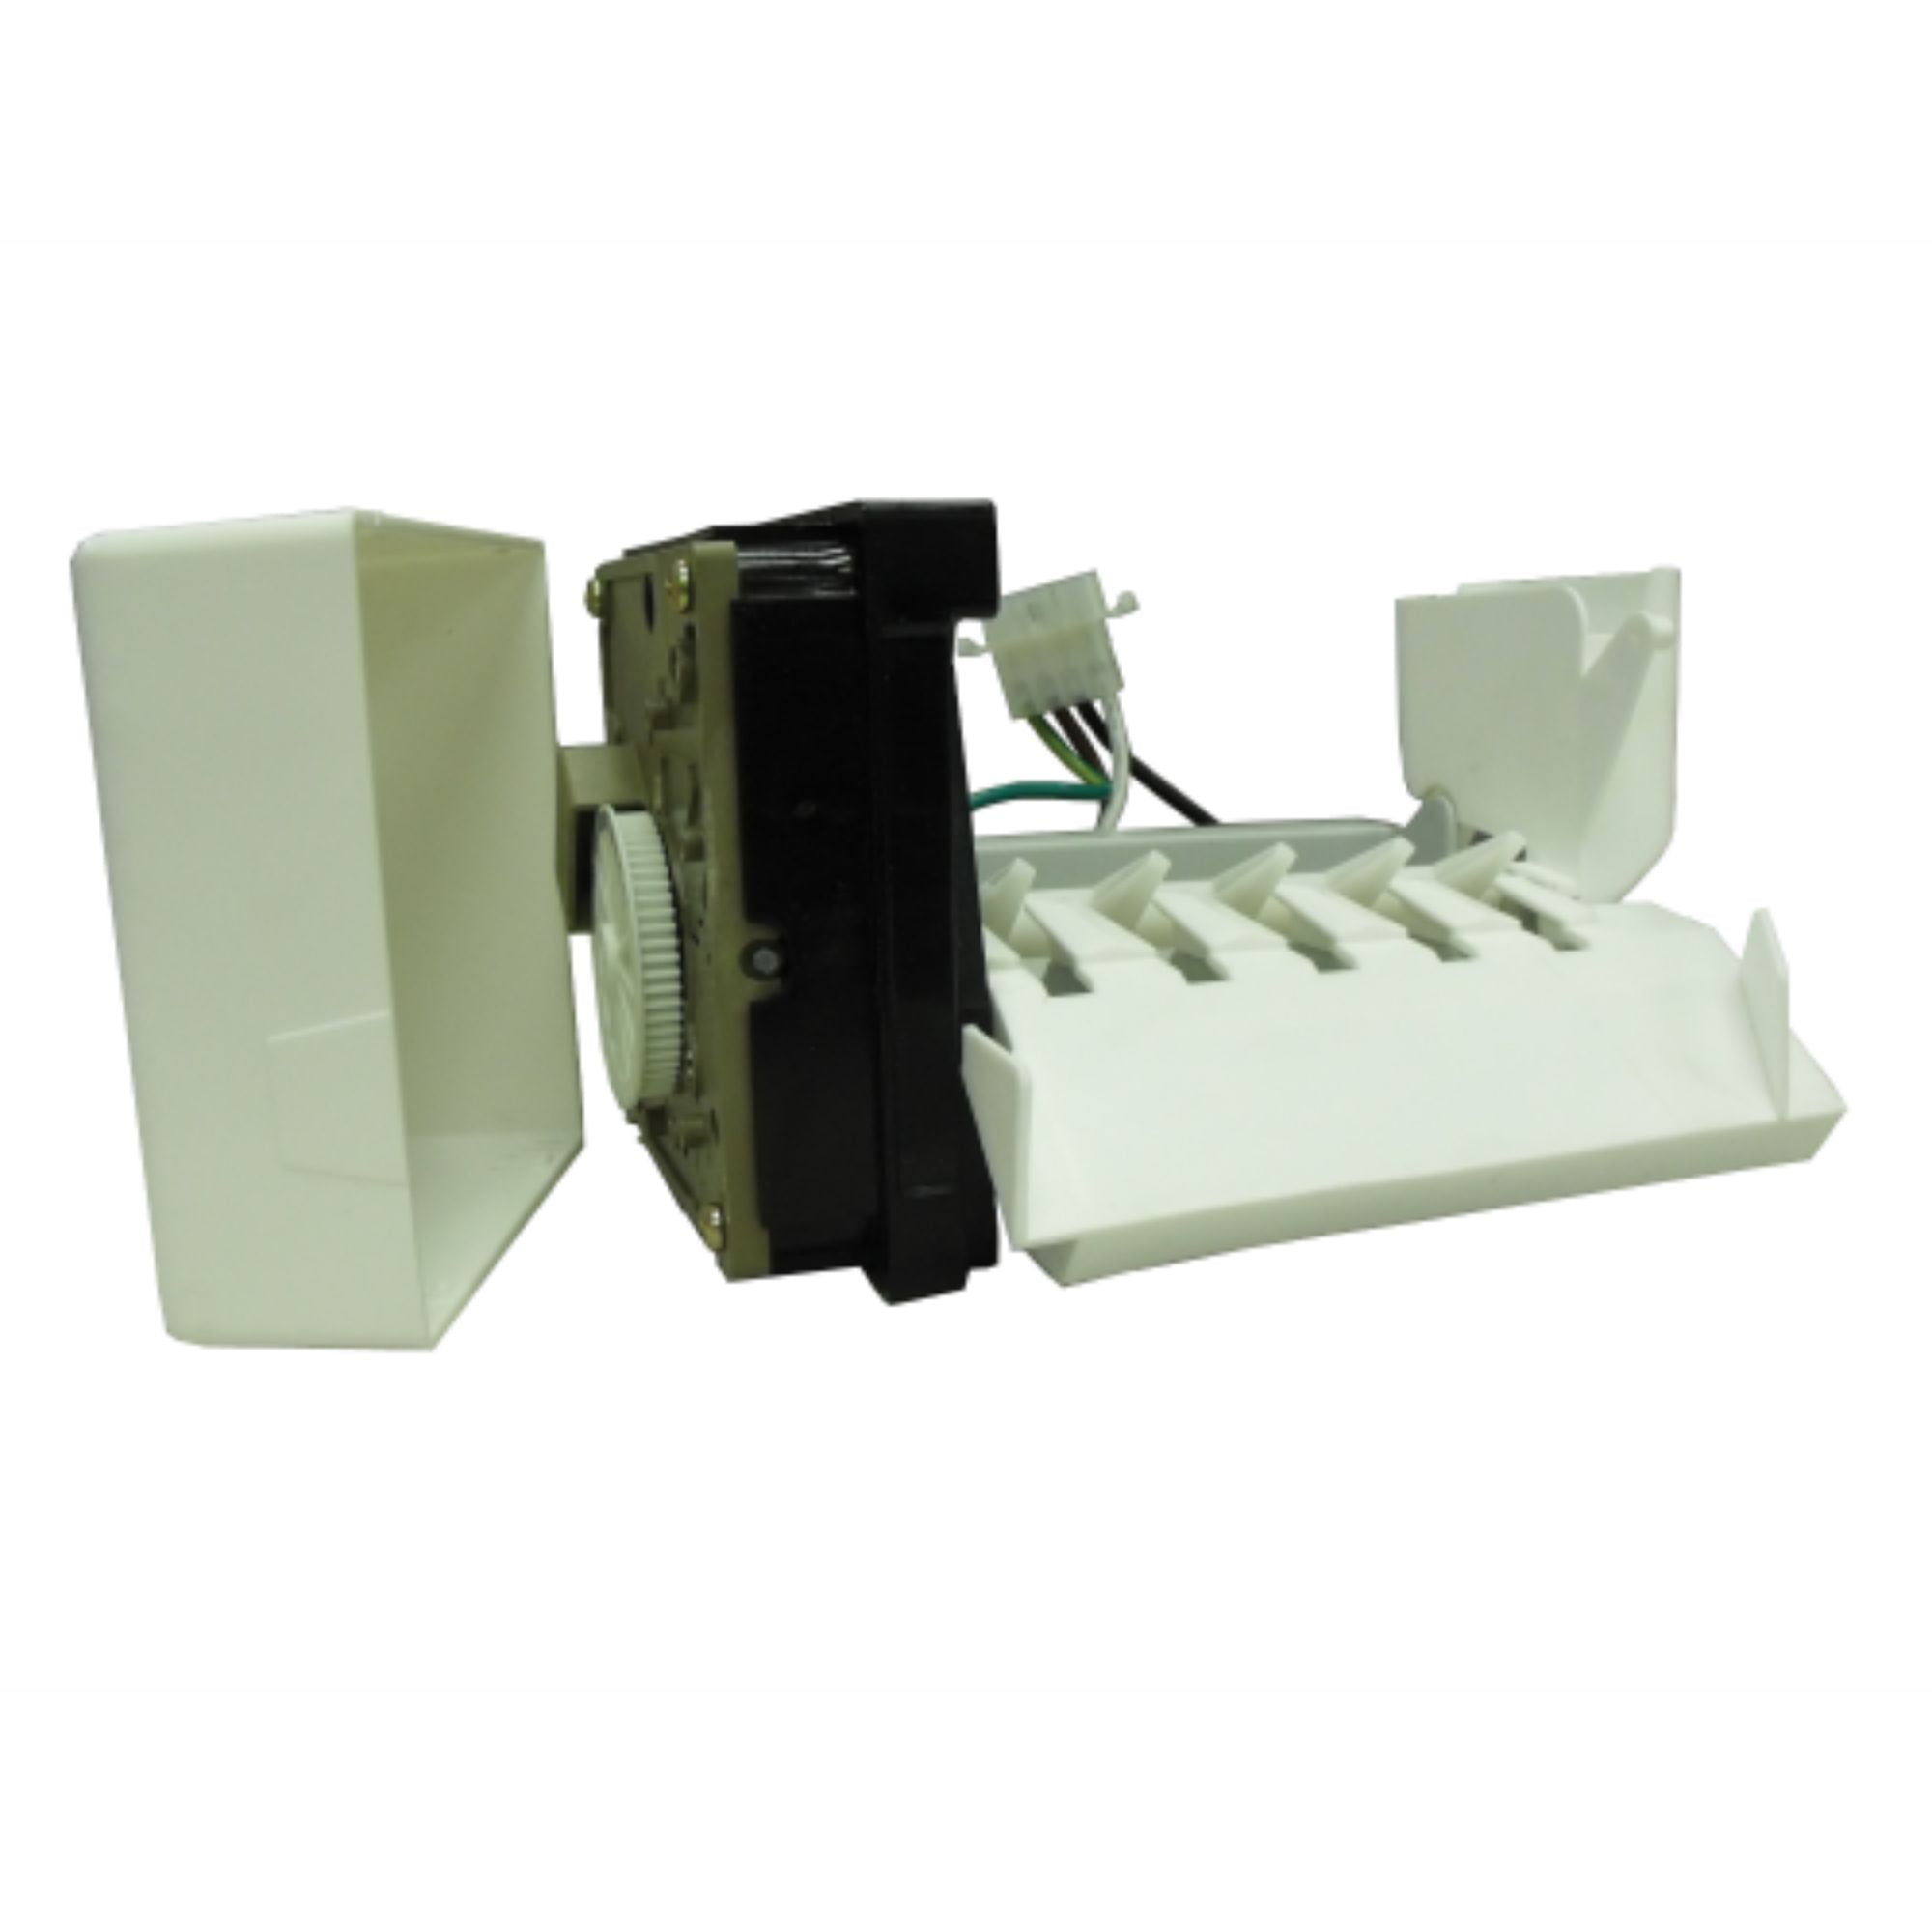 ForeverPRO W10190961 Icemaker for Whirlpool Refrigerator 2212352 W10122503 14... 